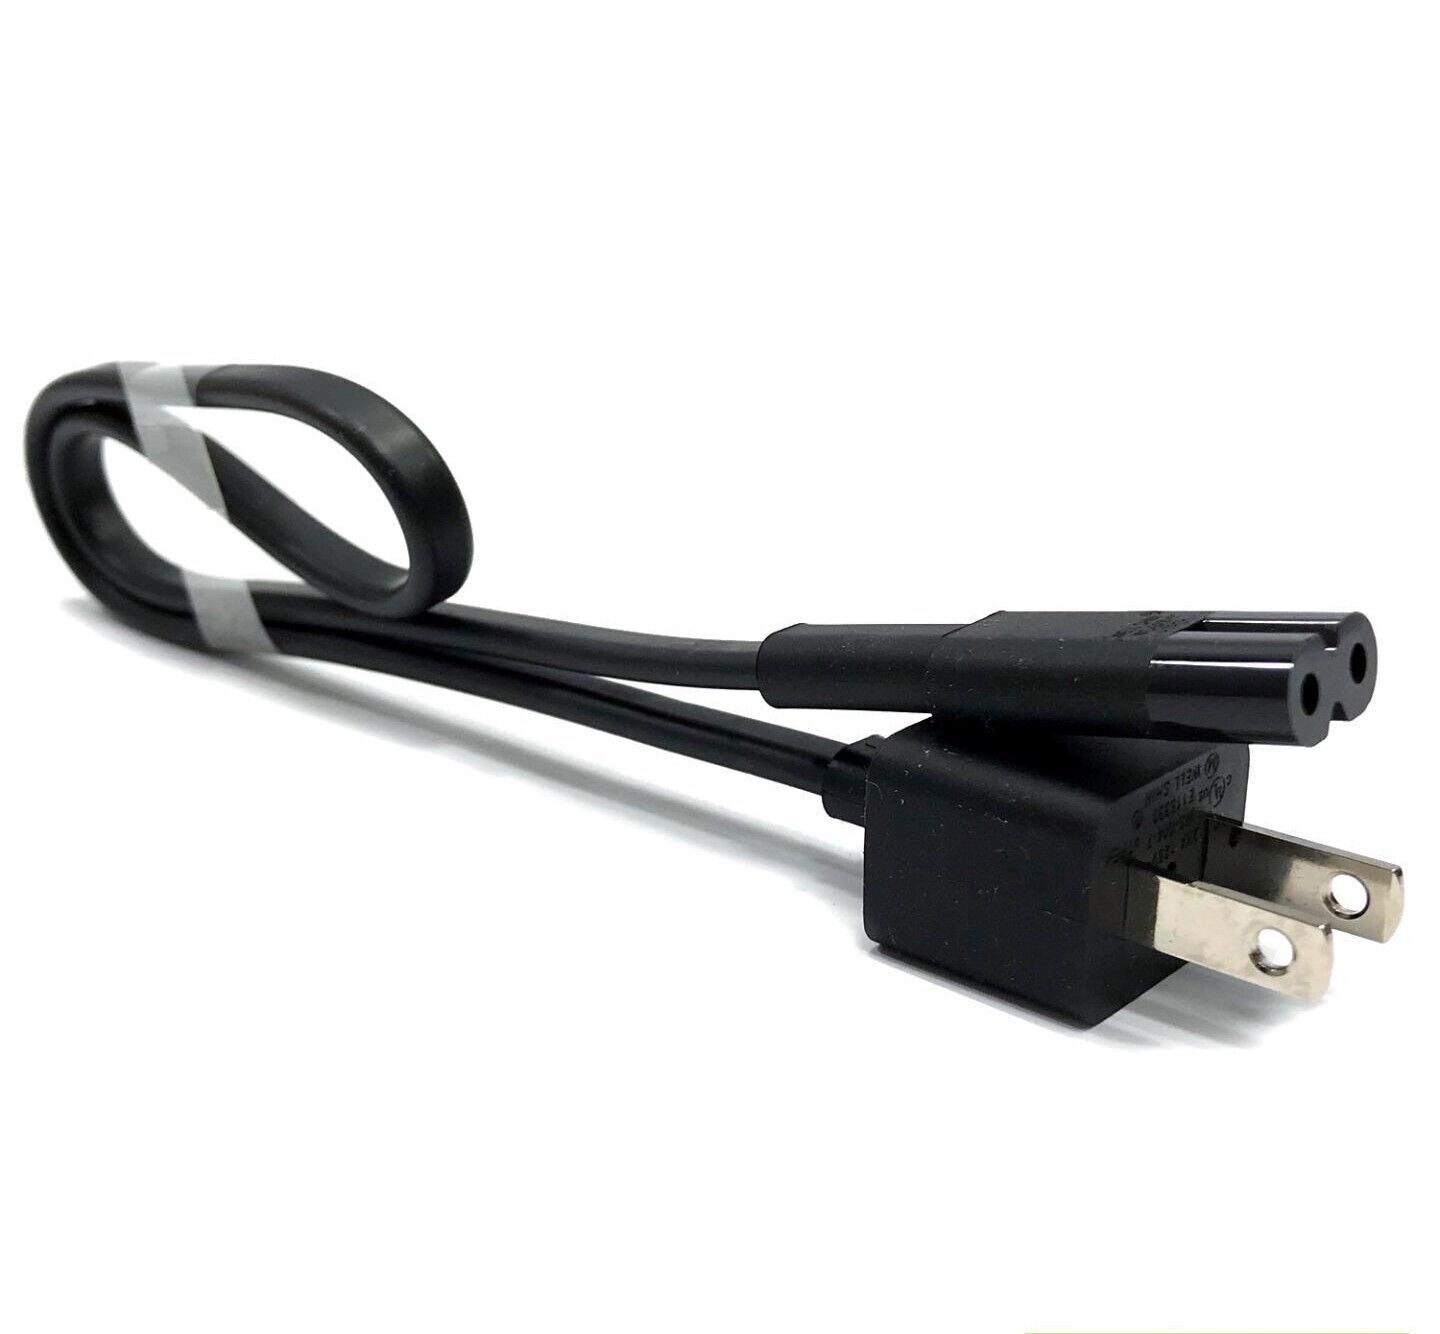 Microsoft 1 1/4ft AC Power adapter Cable Cord, 2.5A 125V Power Supply (50 Pack)